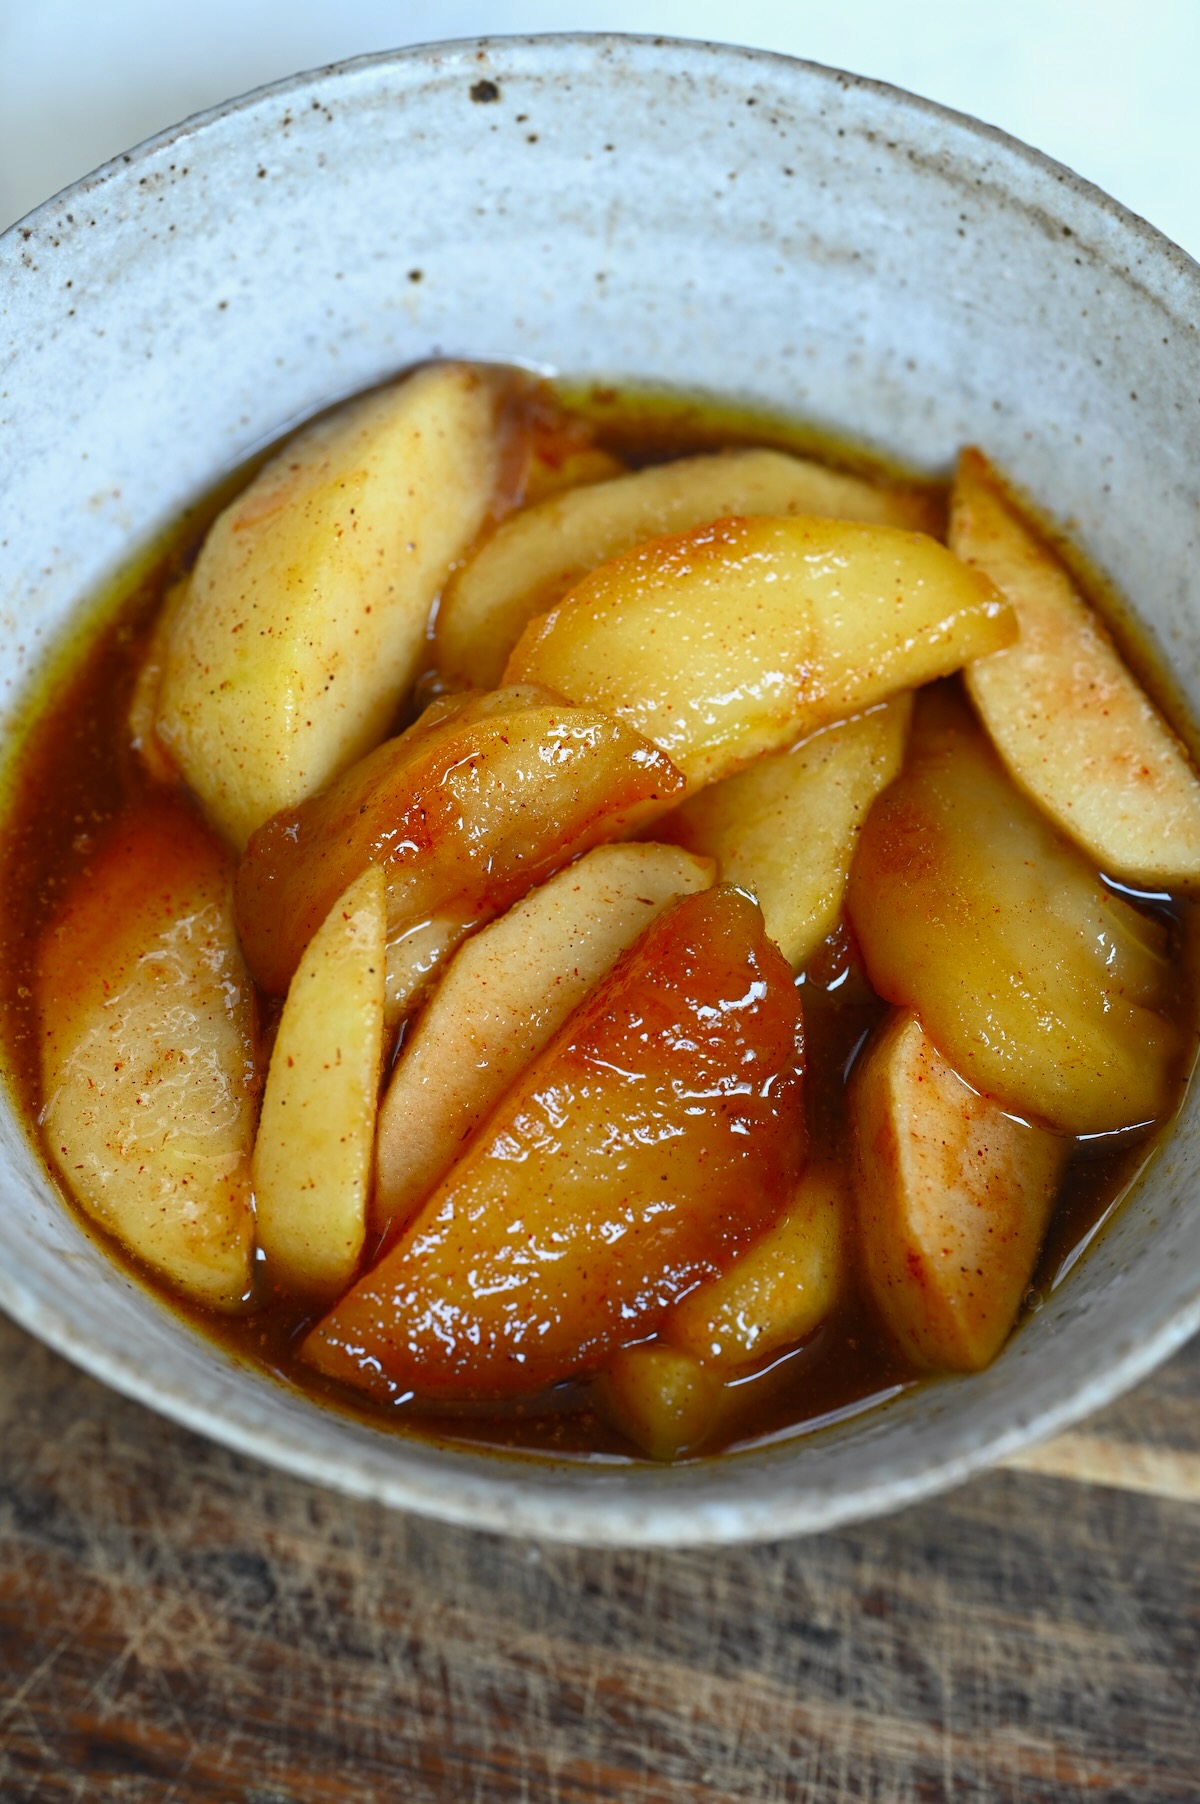 A serving of fried apples in a bowl